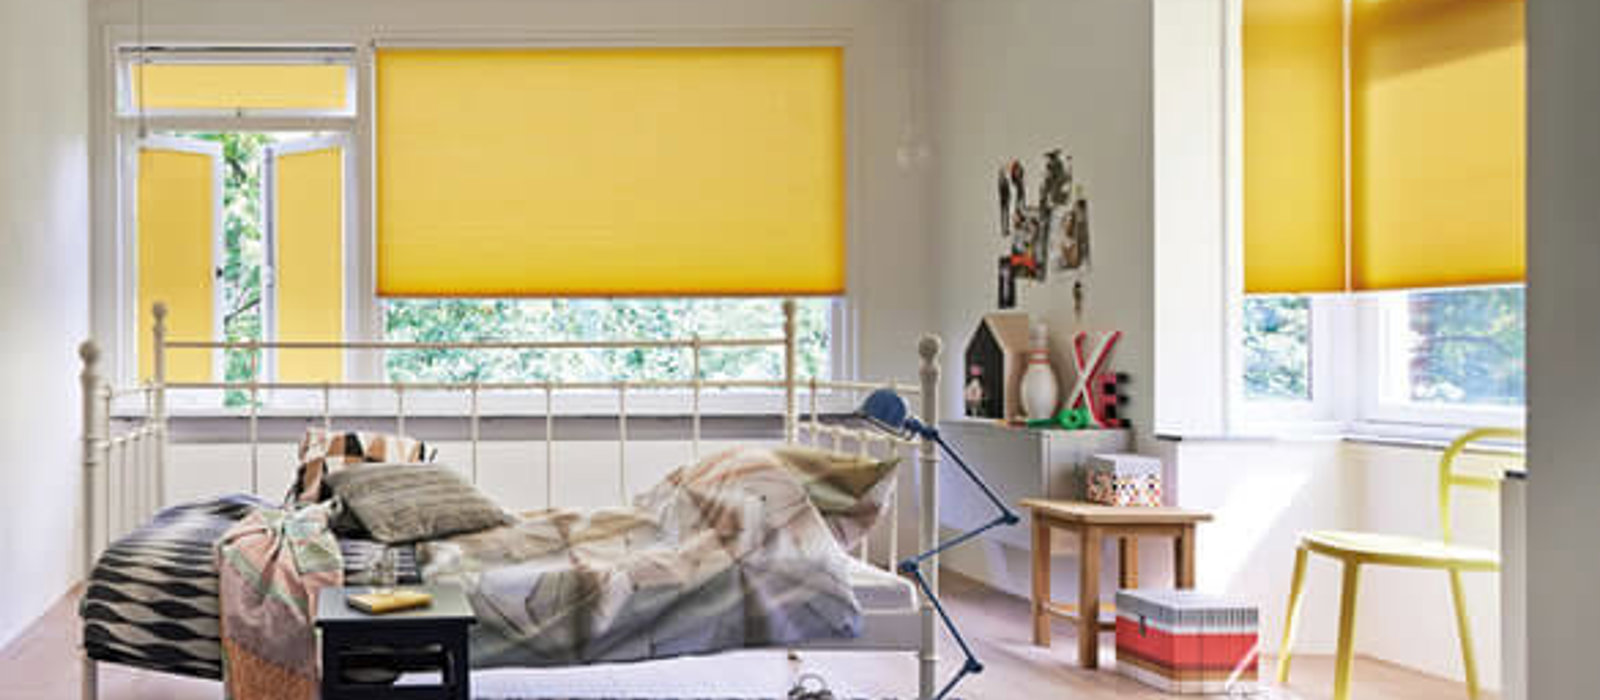 Bedroom with colourful yellow Duette energy-saving blinds